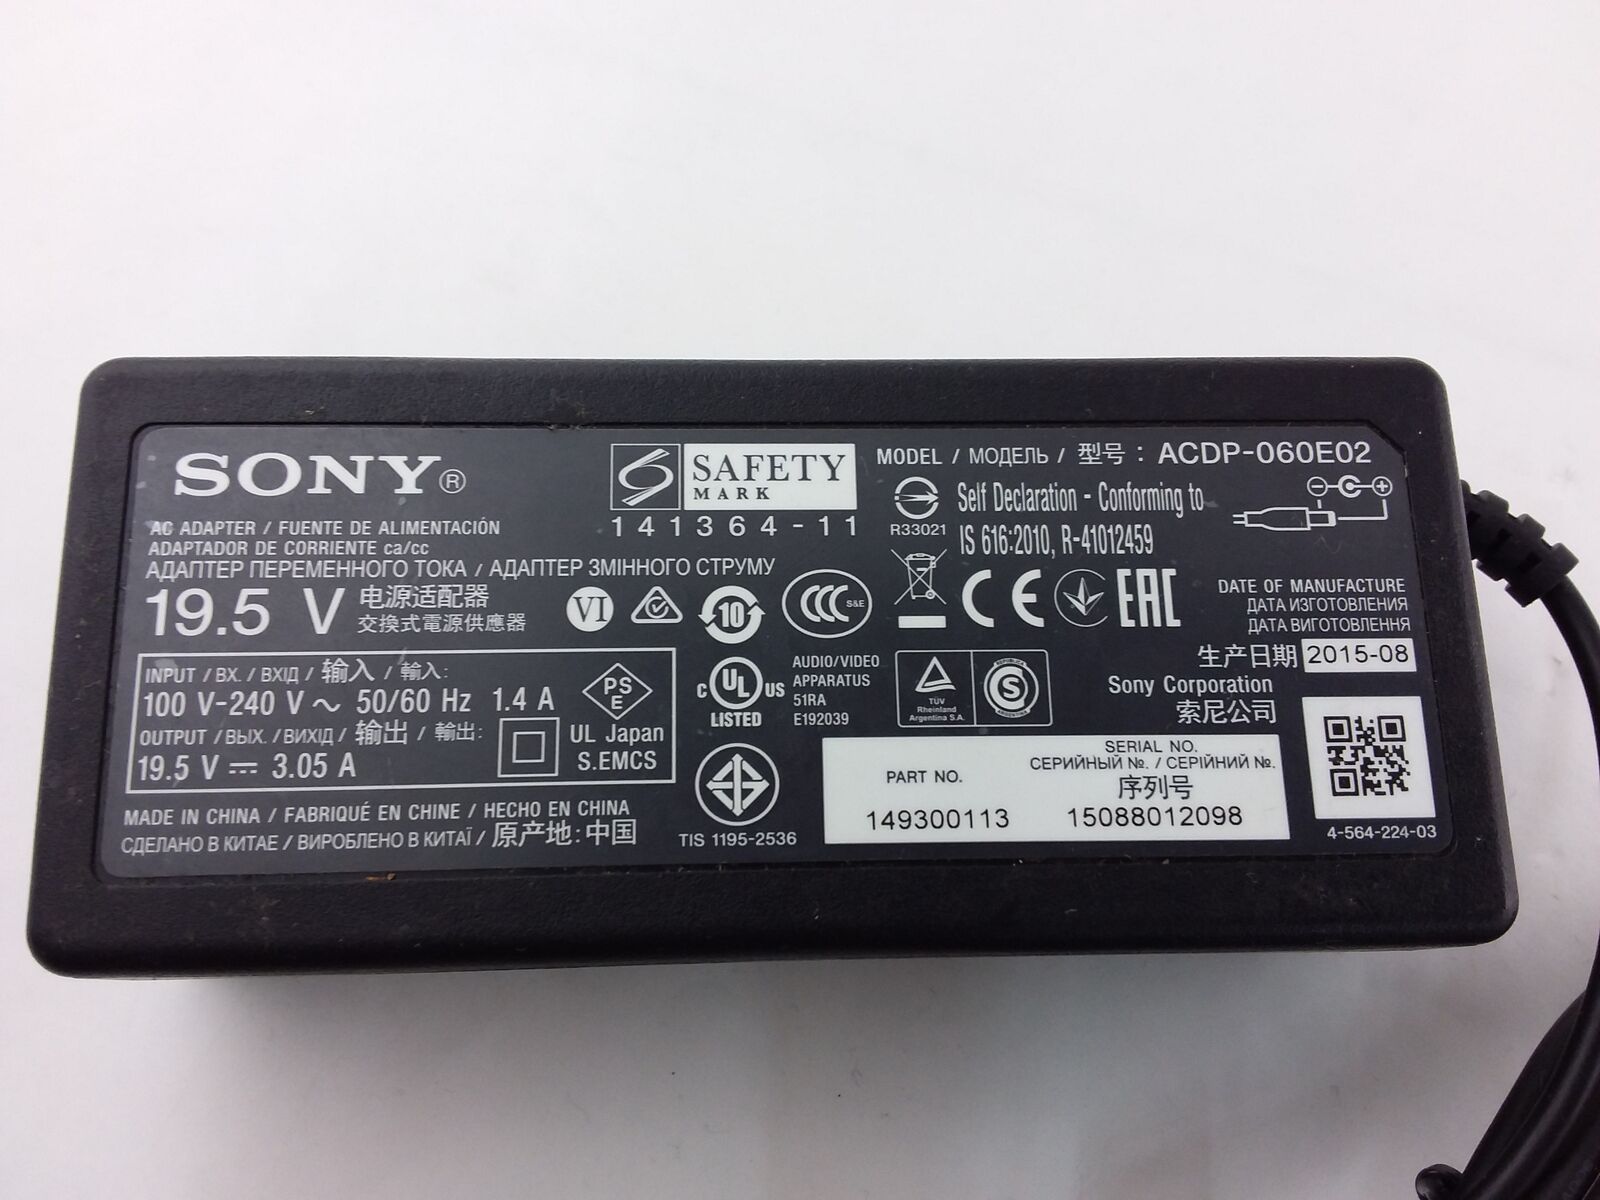 Original Sony ACDP-060E02 TV Power Adapter Cable Cord Box Brand: Sony MPN: ACDP-060E02-USED Type: Power Adapter - TV